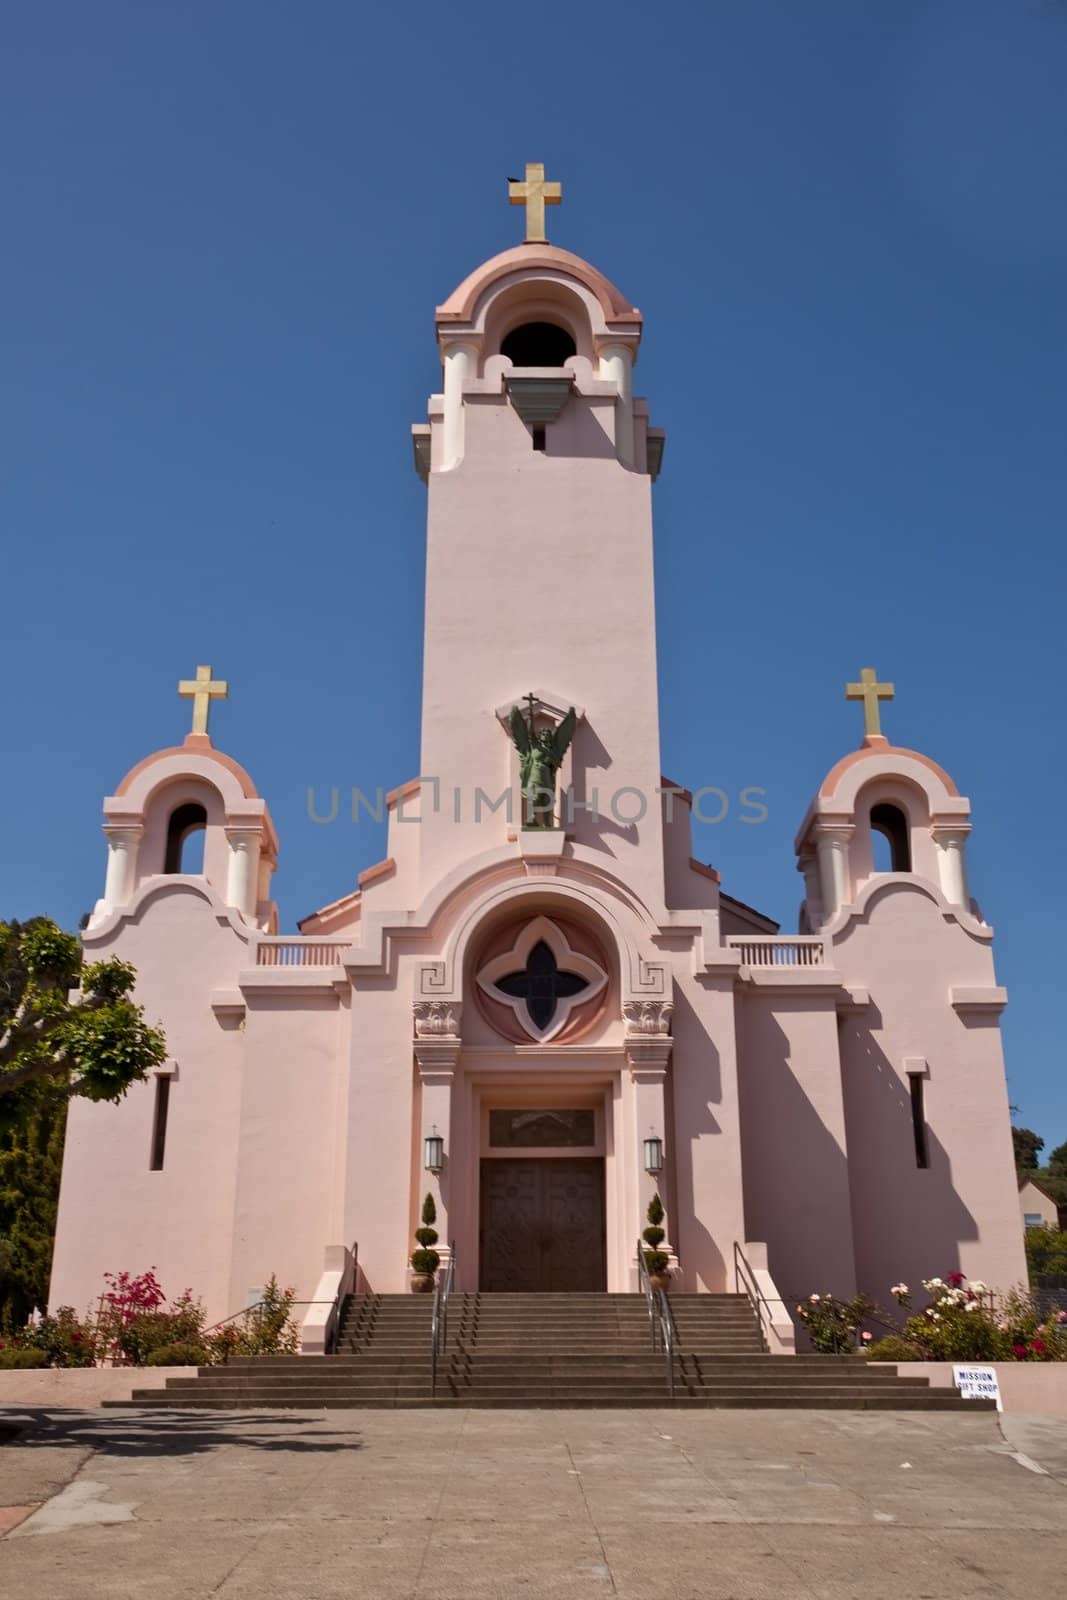 Mission San Rafael Arc�ngel was founded on December 14, 1817 as a medical asistencia ("sub-mission") of the Mission San Francisco de As�